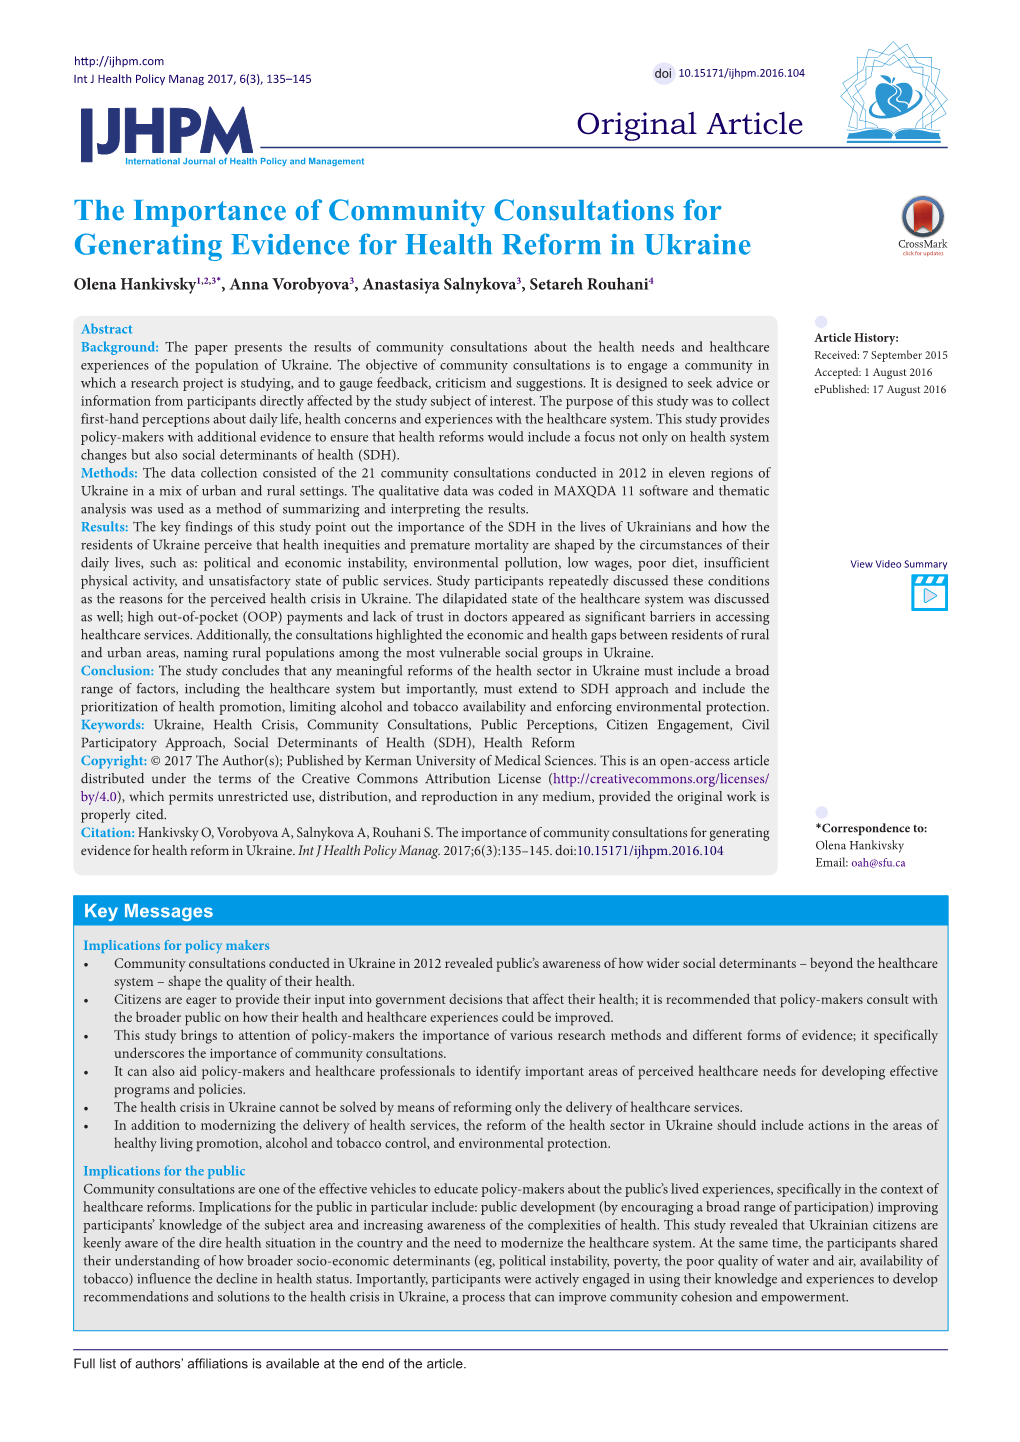 The Importance of Community Consultations for Generating Evidence for Health Reform in Ukraine